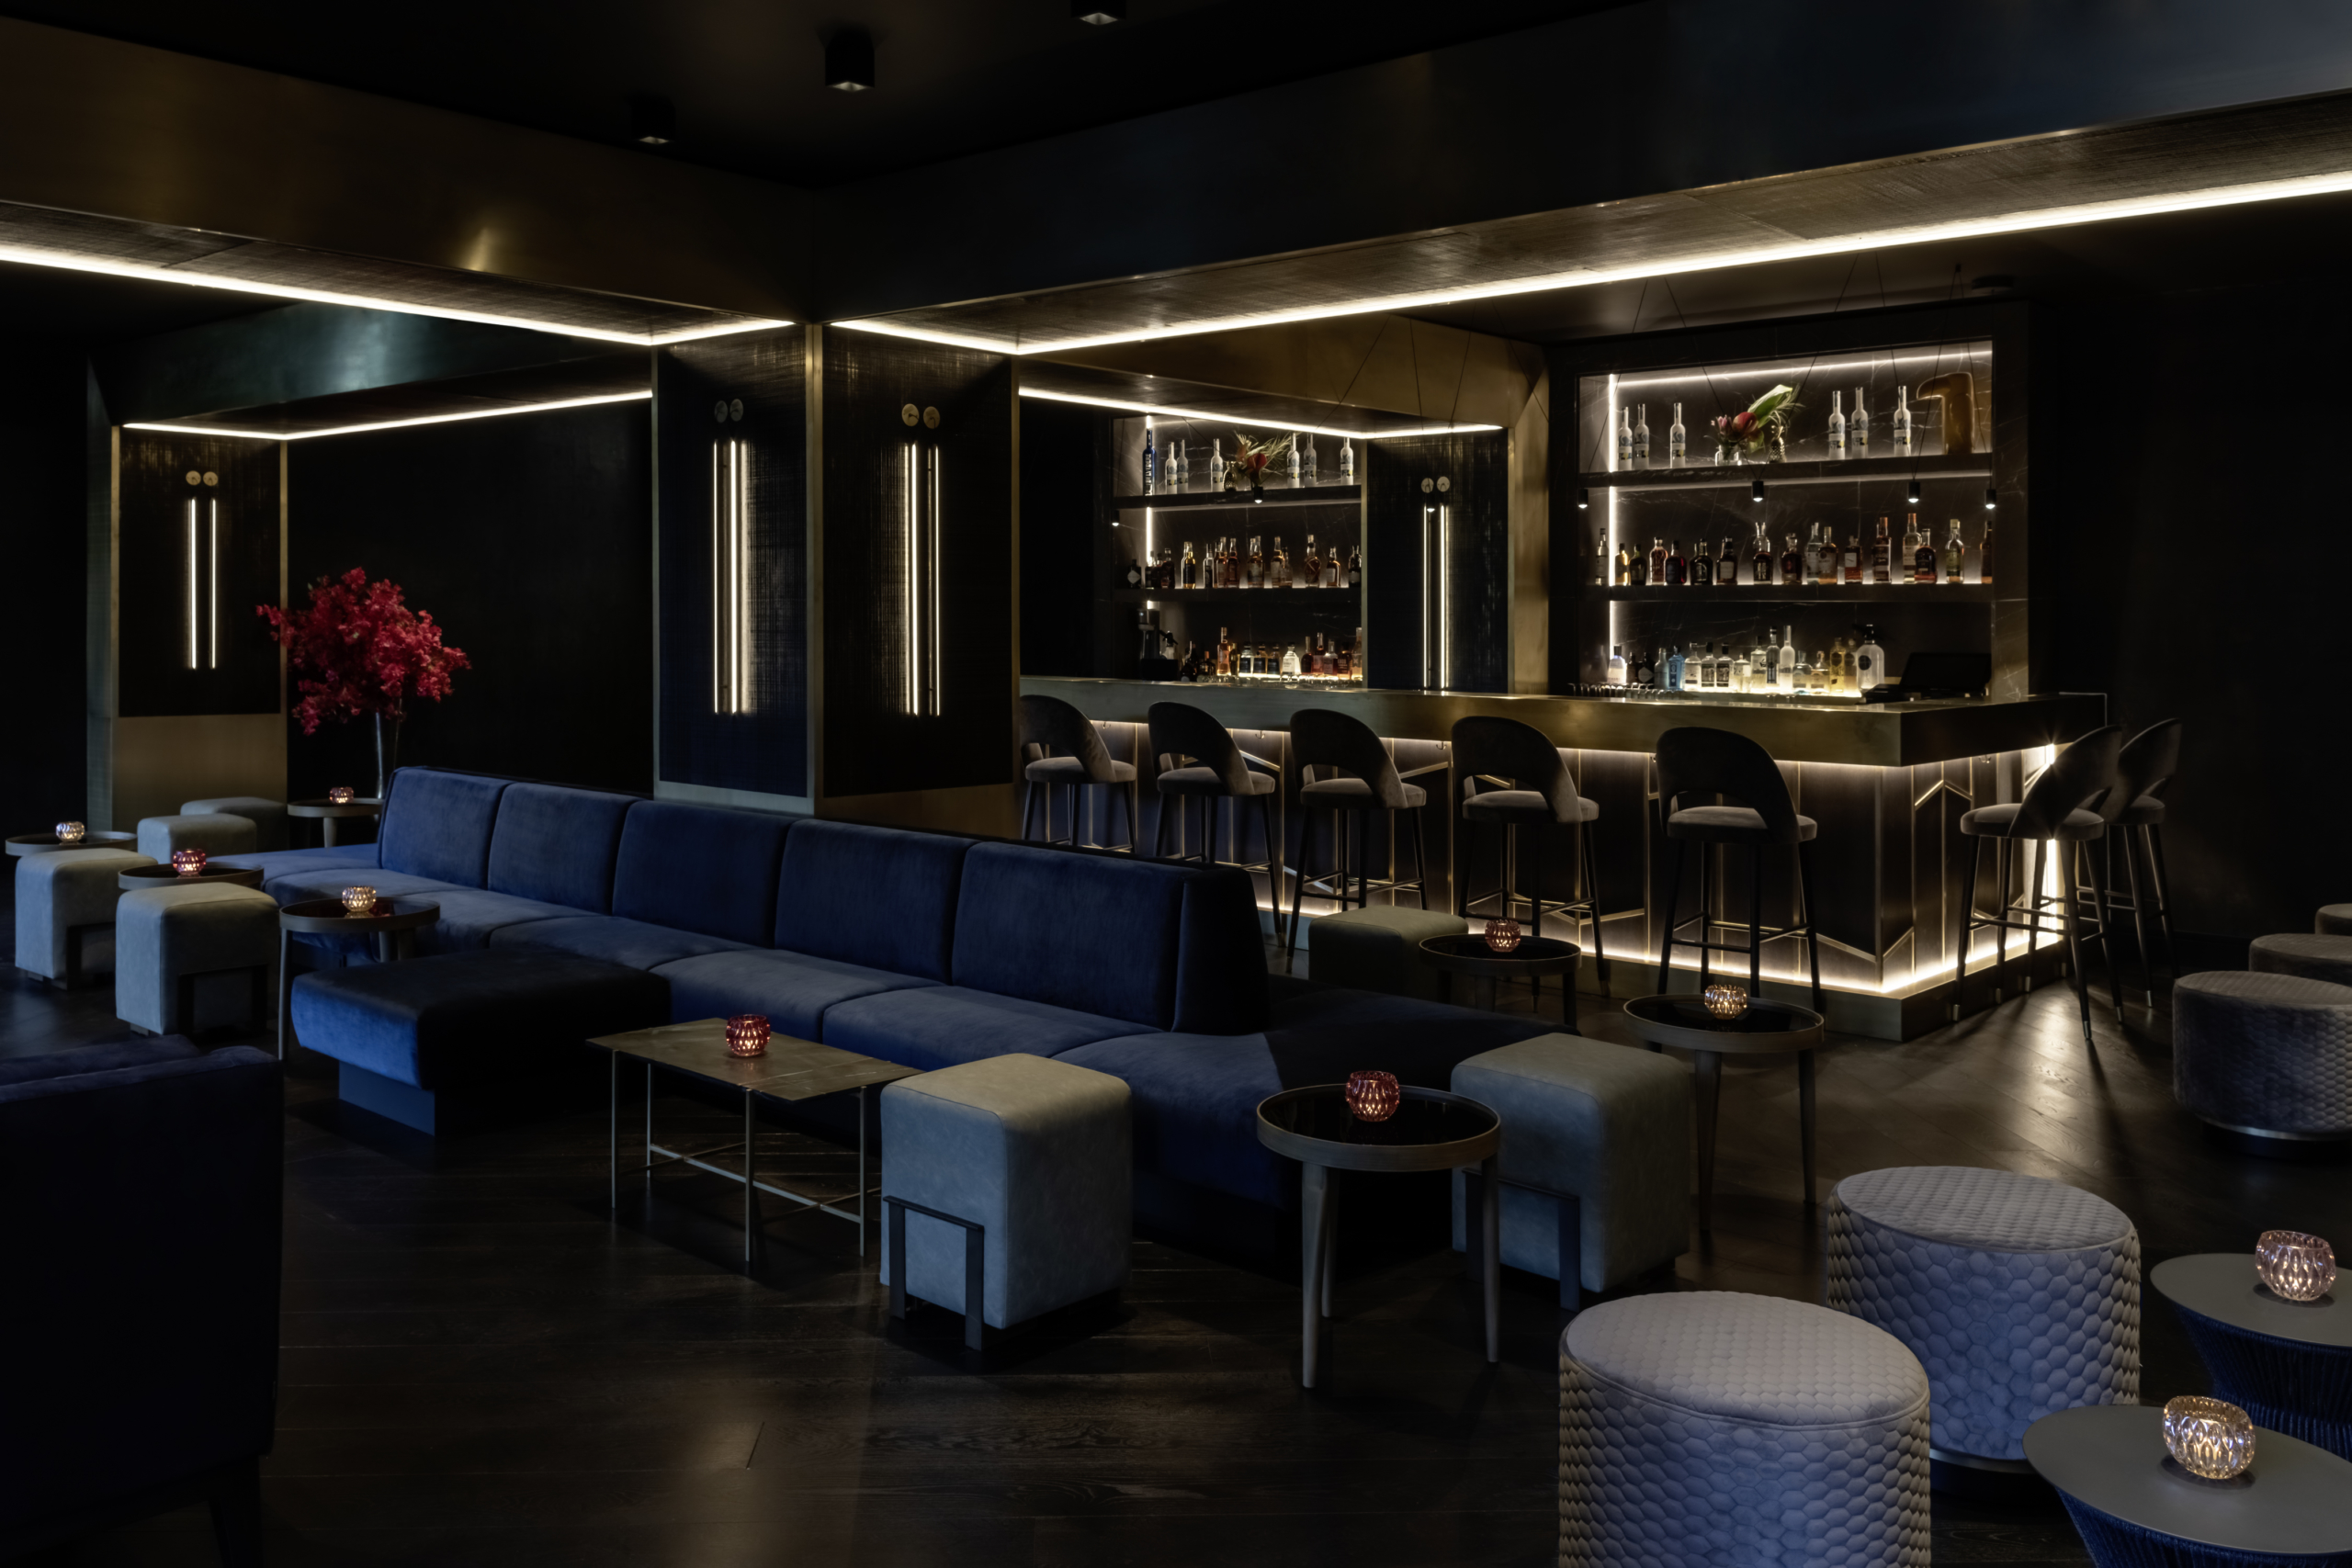 NEXO ID Series helps to create lively spaces that wow at AMANO Group hotels in Berlin